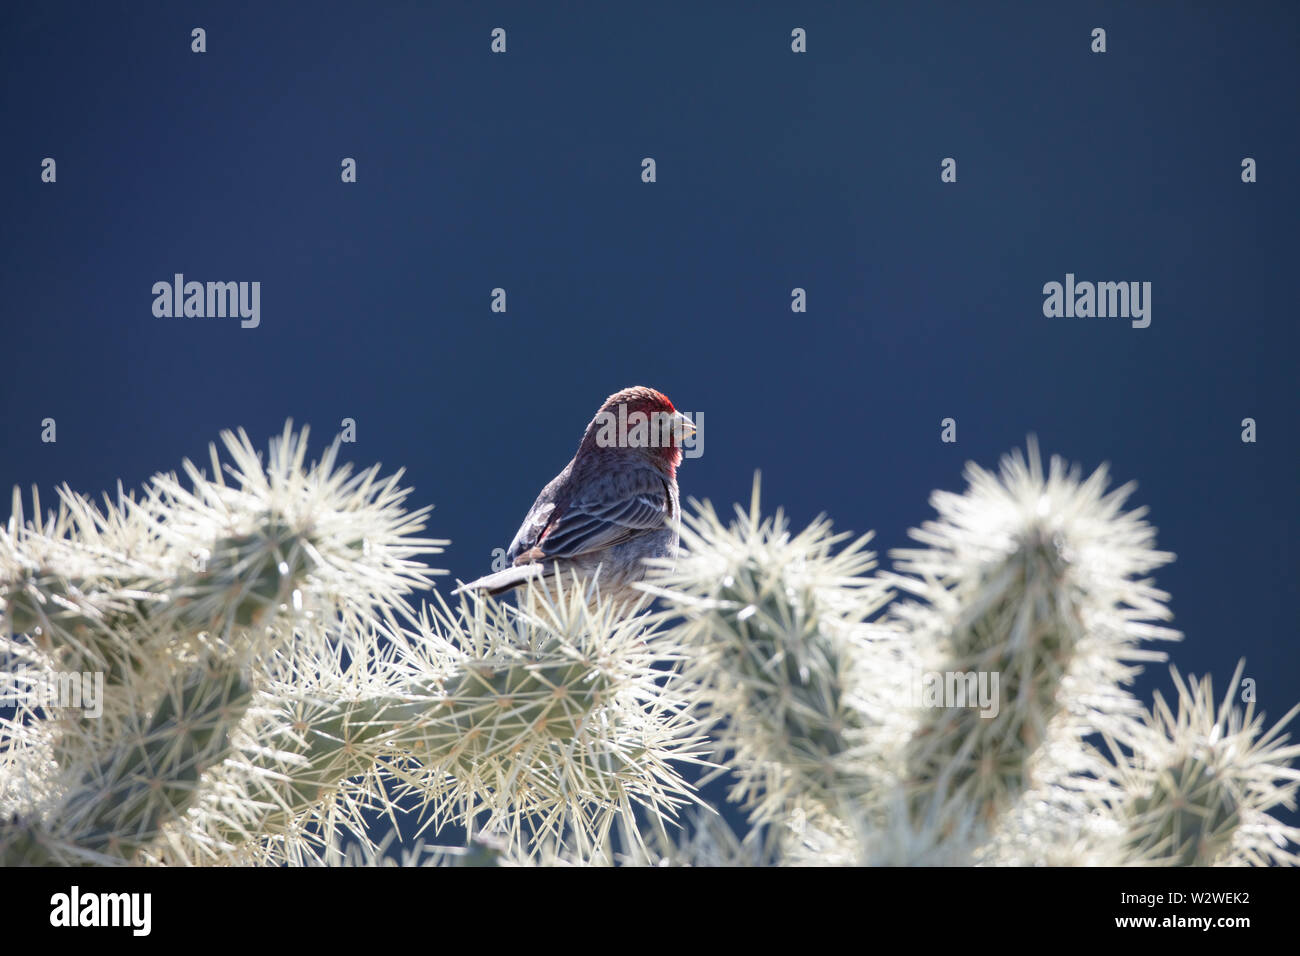 A house finch (Haemorhous mexicanus) sits on cholla cactus in the Arizona desert Stock Photo